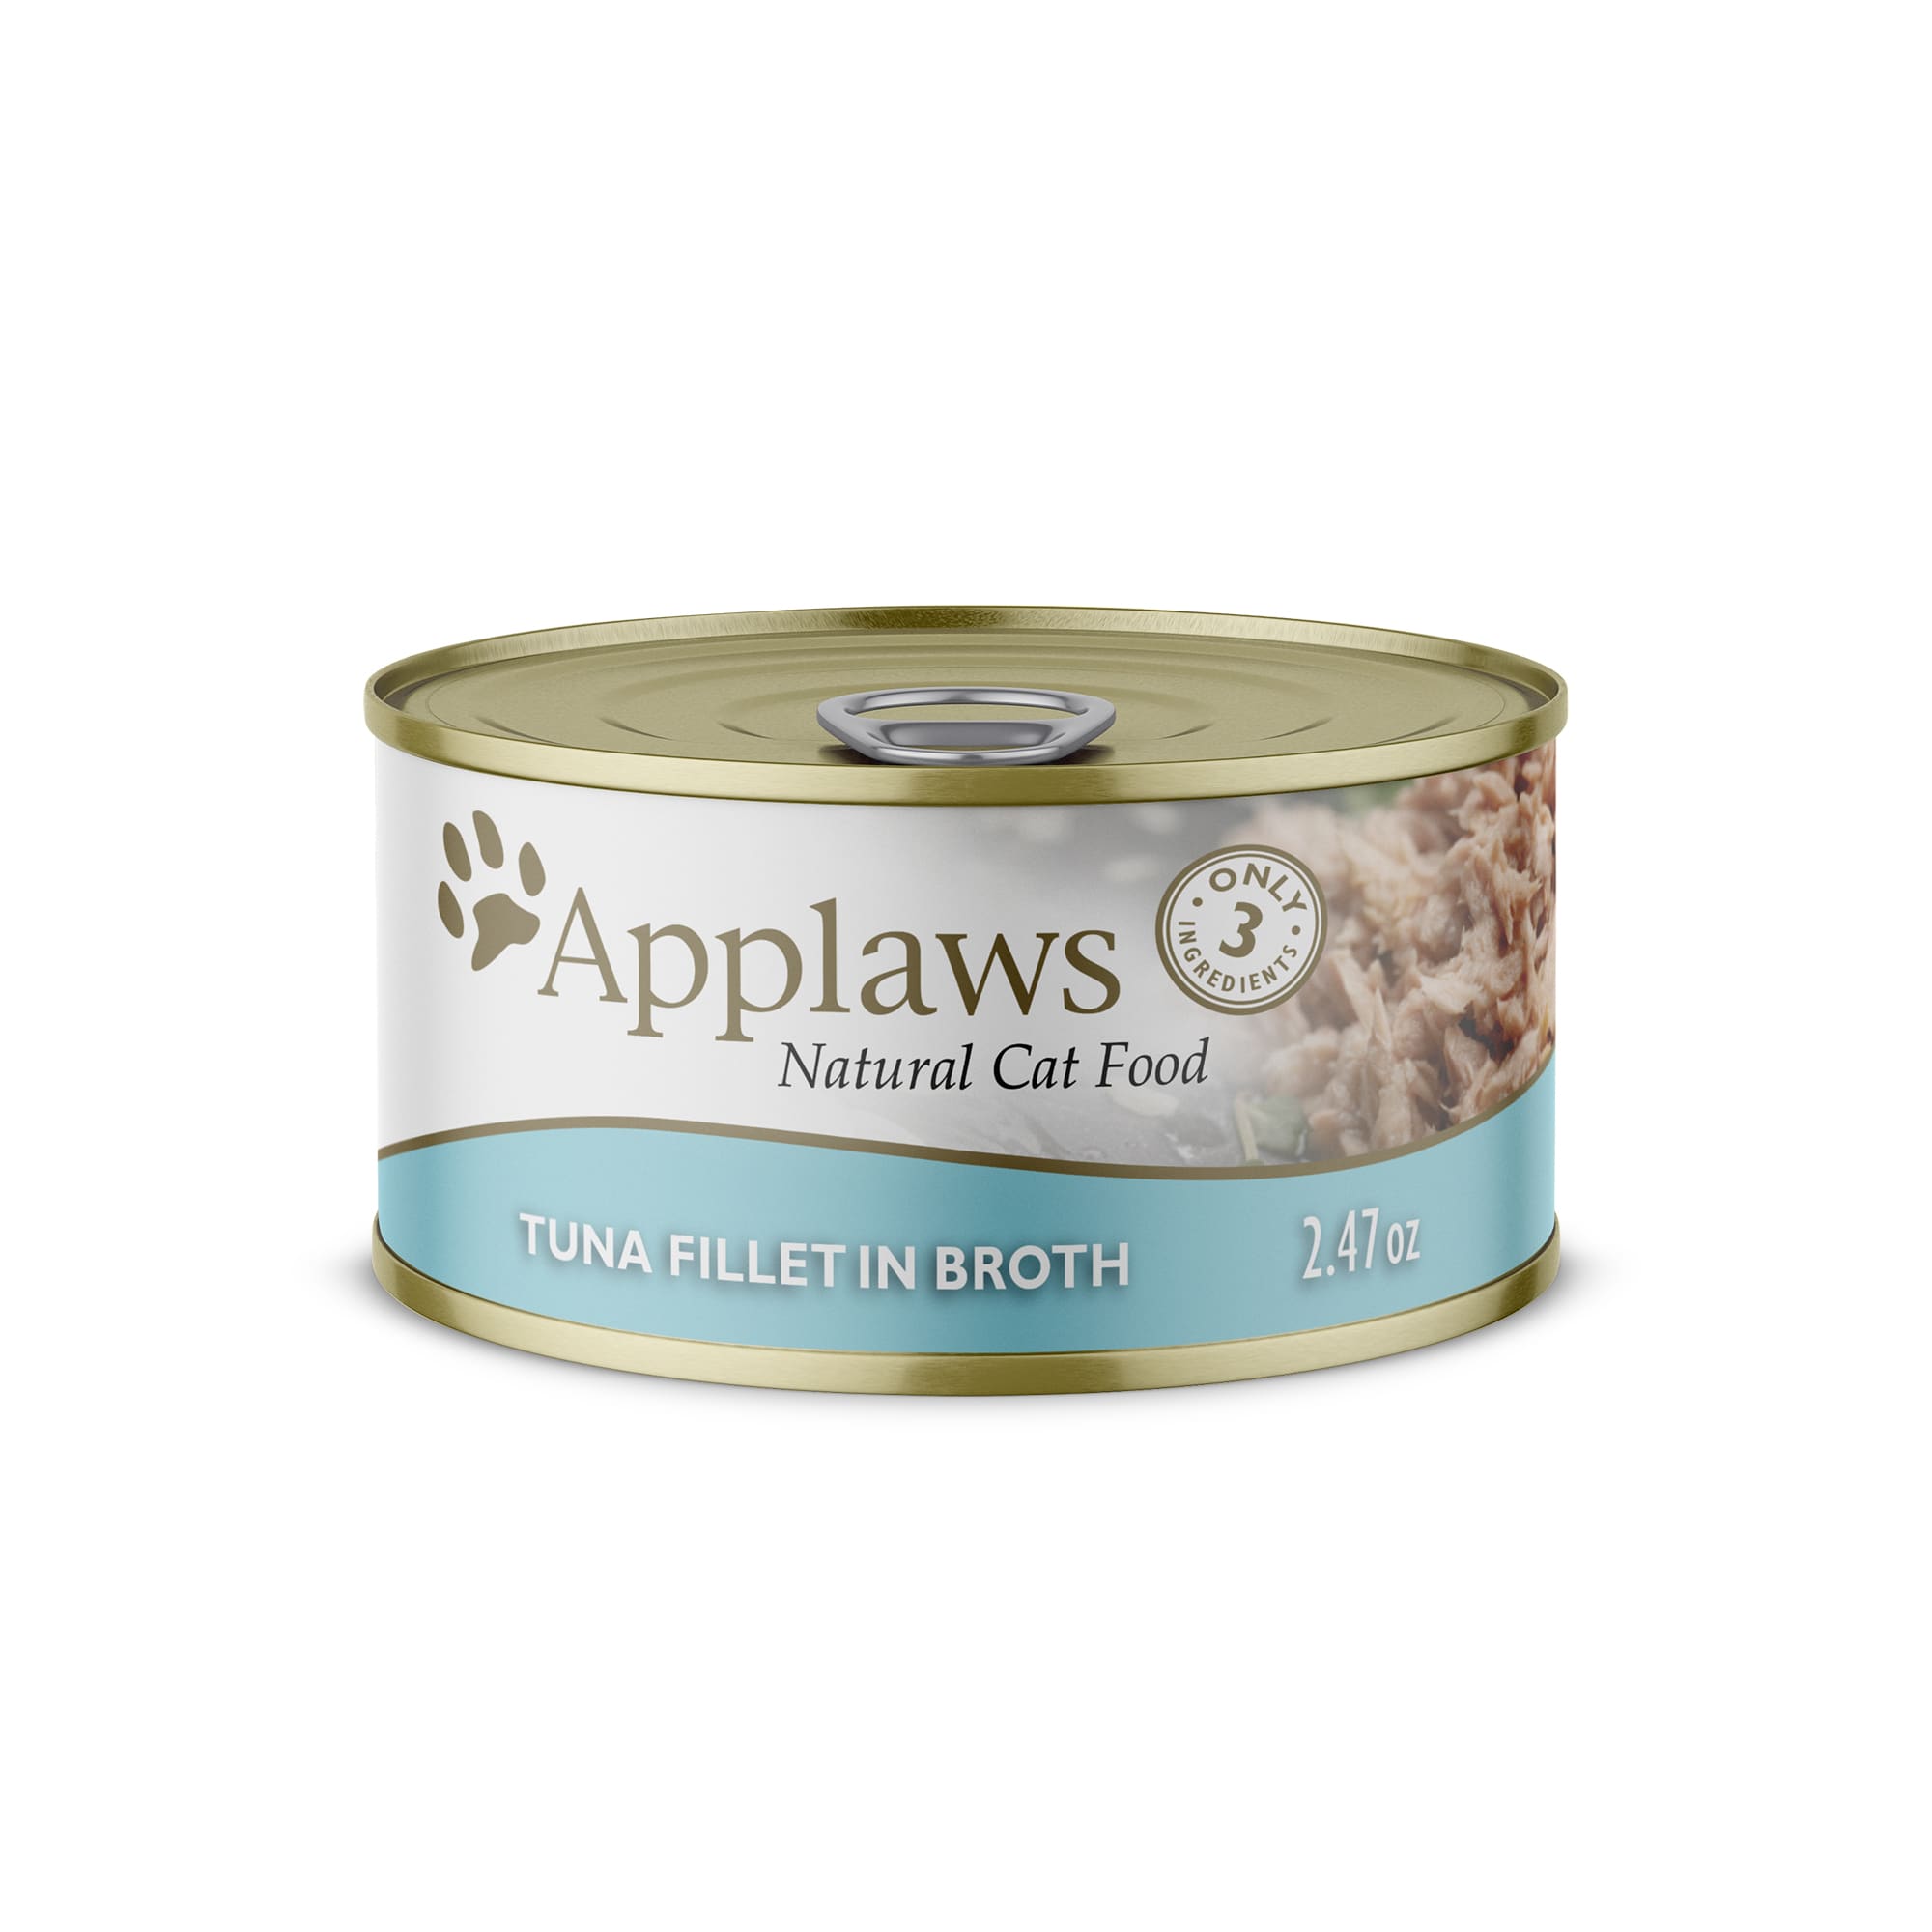 Applaws Tuna Fillet Canned Cat Food, 5 